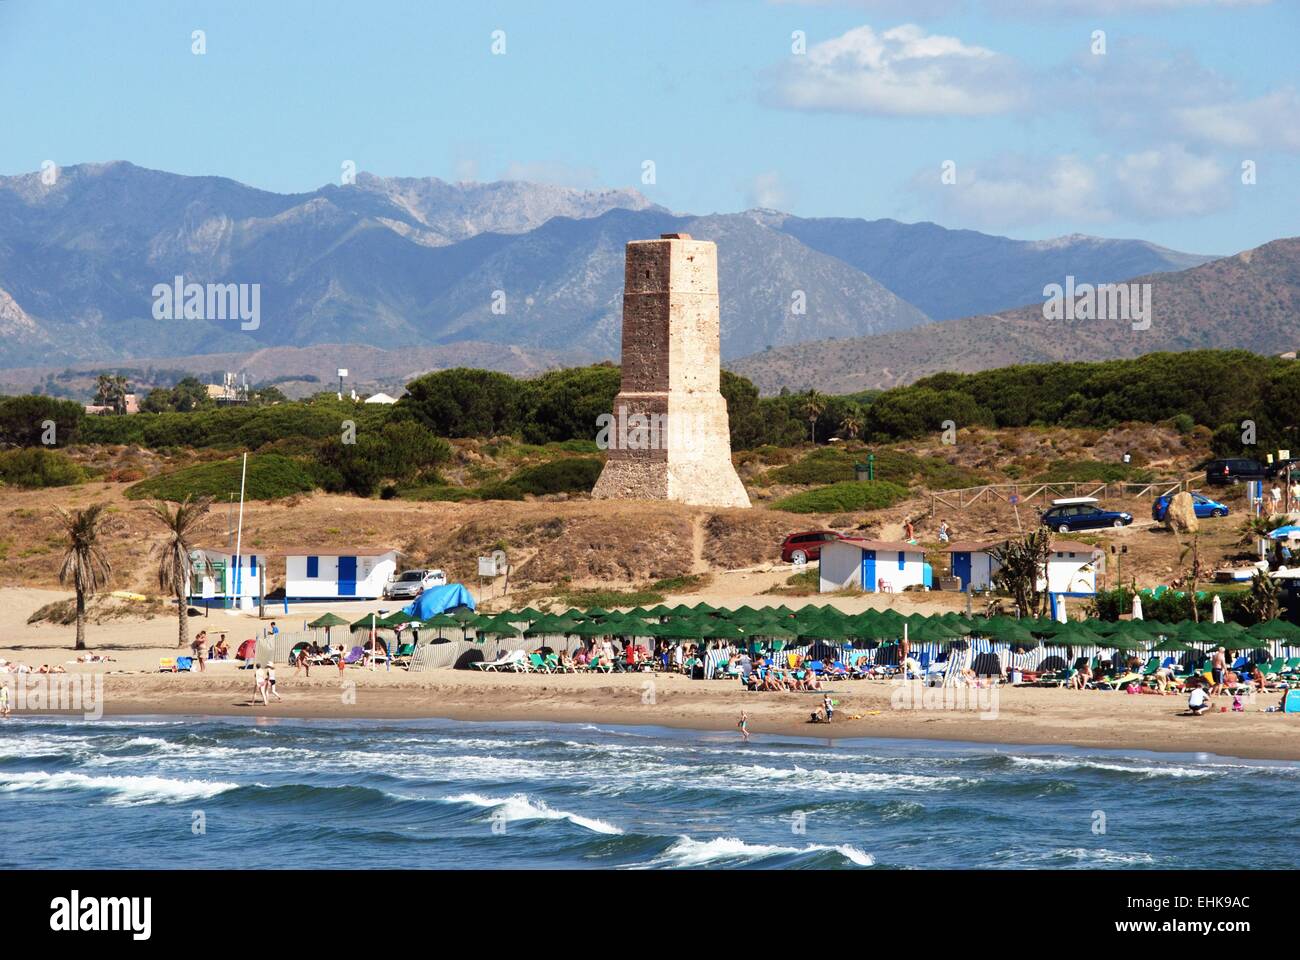 View of the beach with the watchtower and mountains to the rear, Puerto Cabopino, Costa del Sol, Malaga Province, Spain. Stock Photo